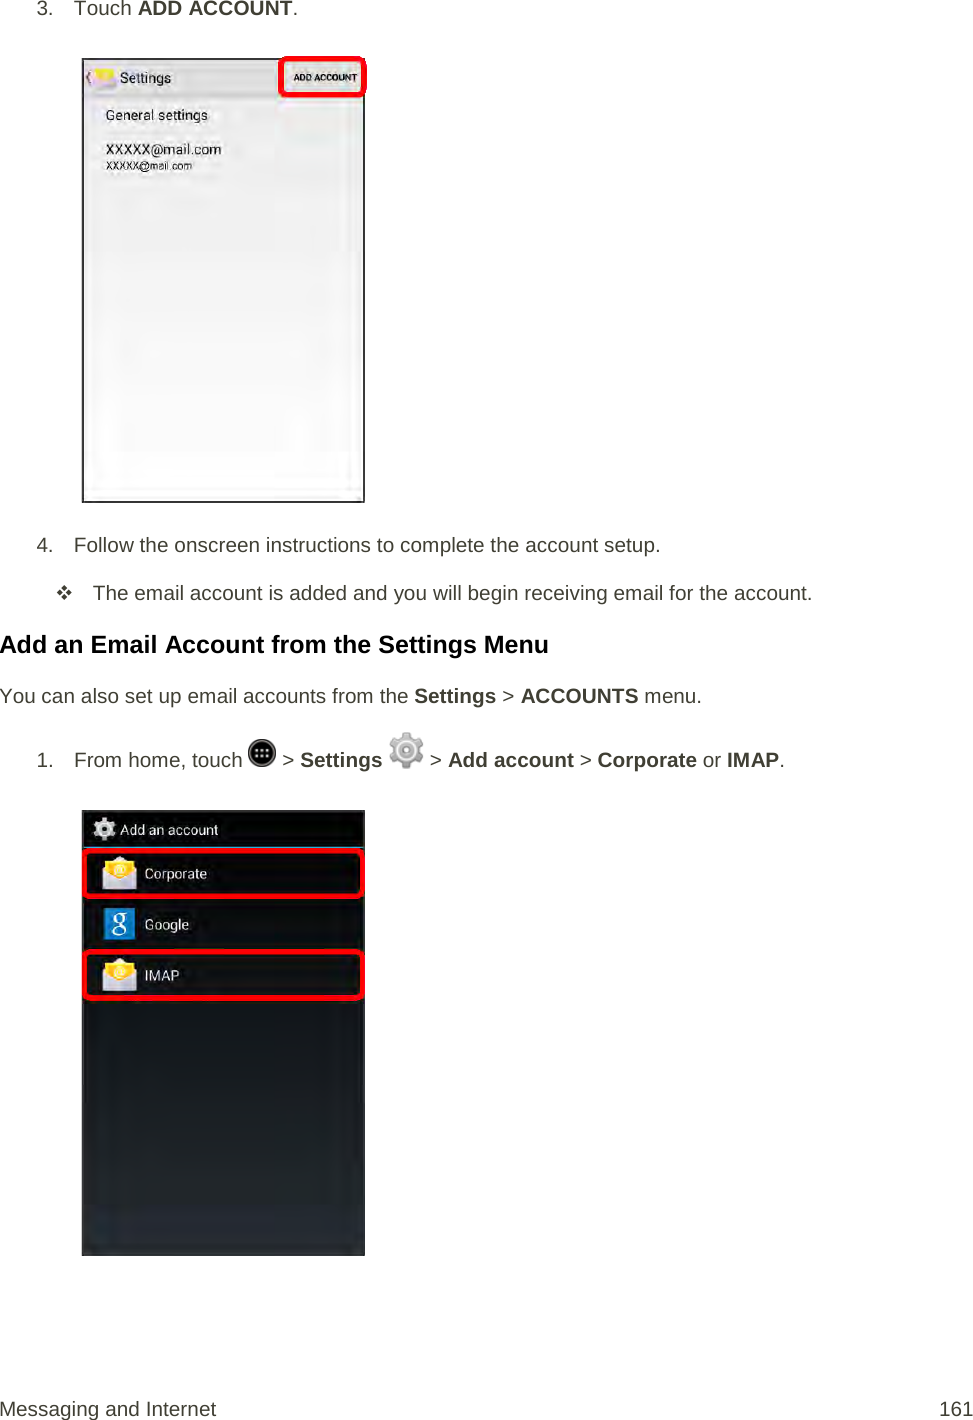 3.  Touch ADD ACCOUNT.   4. Follow the onscreen instructions to complete the account setup.  The email account is added and you will begin receiving email for the account. Add an Email Account from the Settings Menu You can also set up email accounts from the Settings &gt; ACCOUNTS menu. 1.  From home, touch   &gt; Settings   &gt; Add account &gt; Corporate or IMAP.   Messaging and Internet 161 